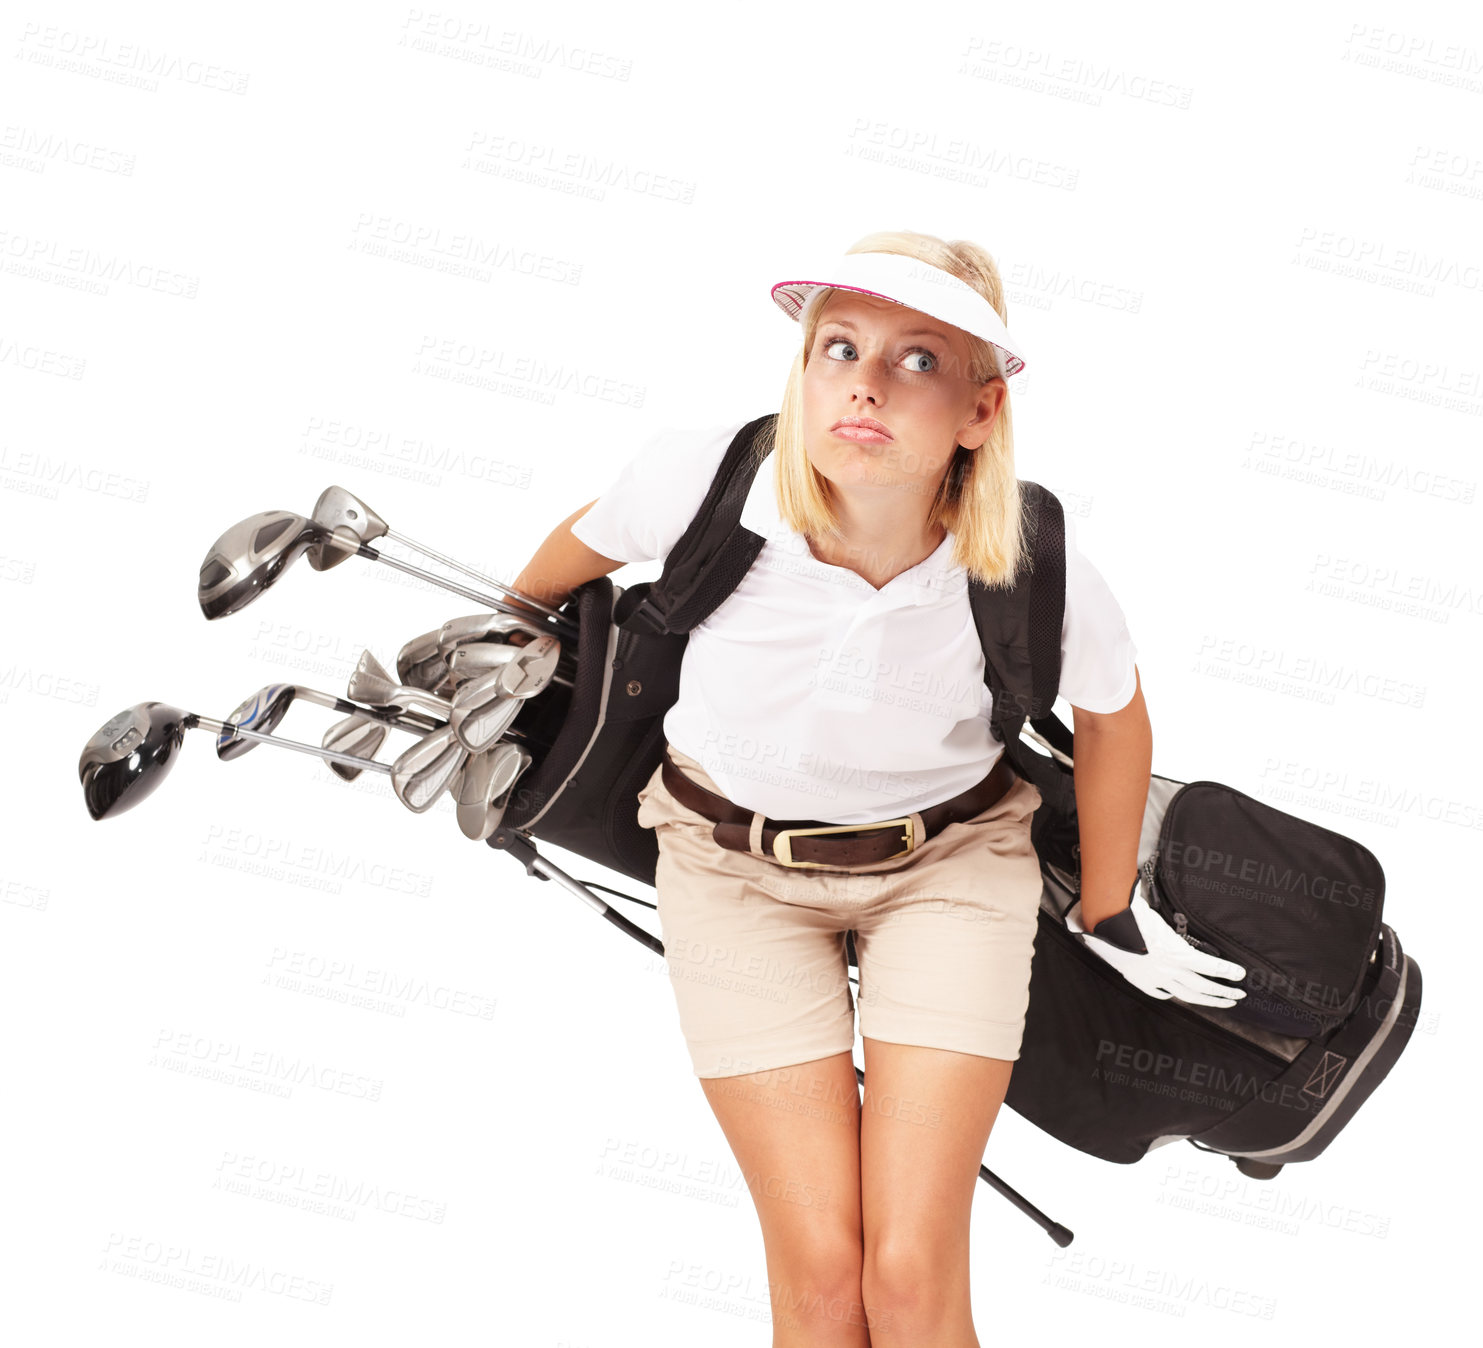 Buy stock photo Sports, golf and woman in a studio with clubs for exercise, training or golfing motivation. Fitness, athlete and female golfer with a confused expression holding equipment by a white background.